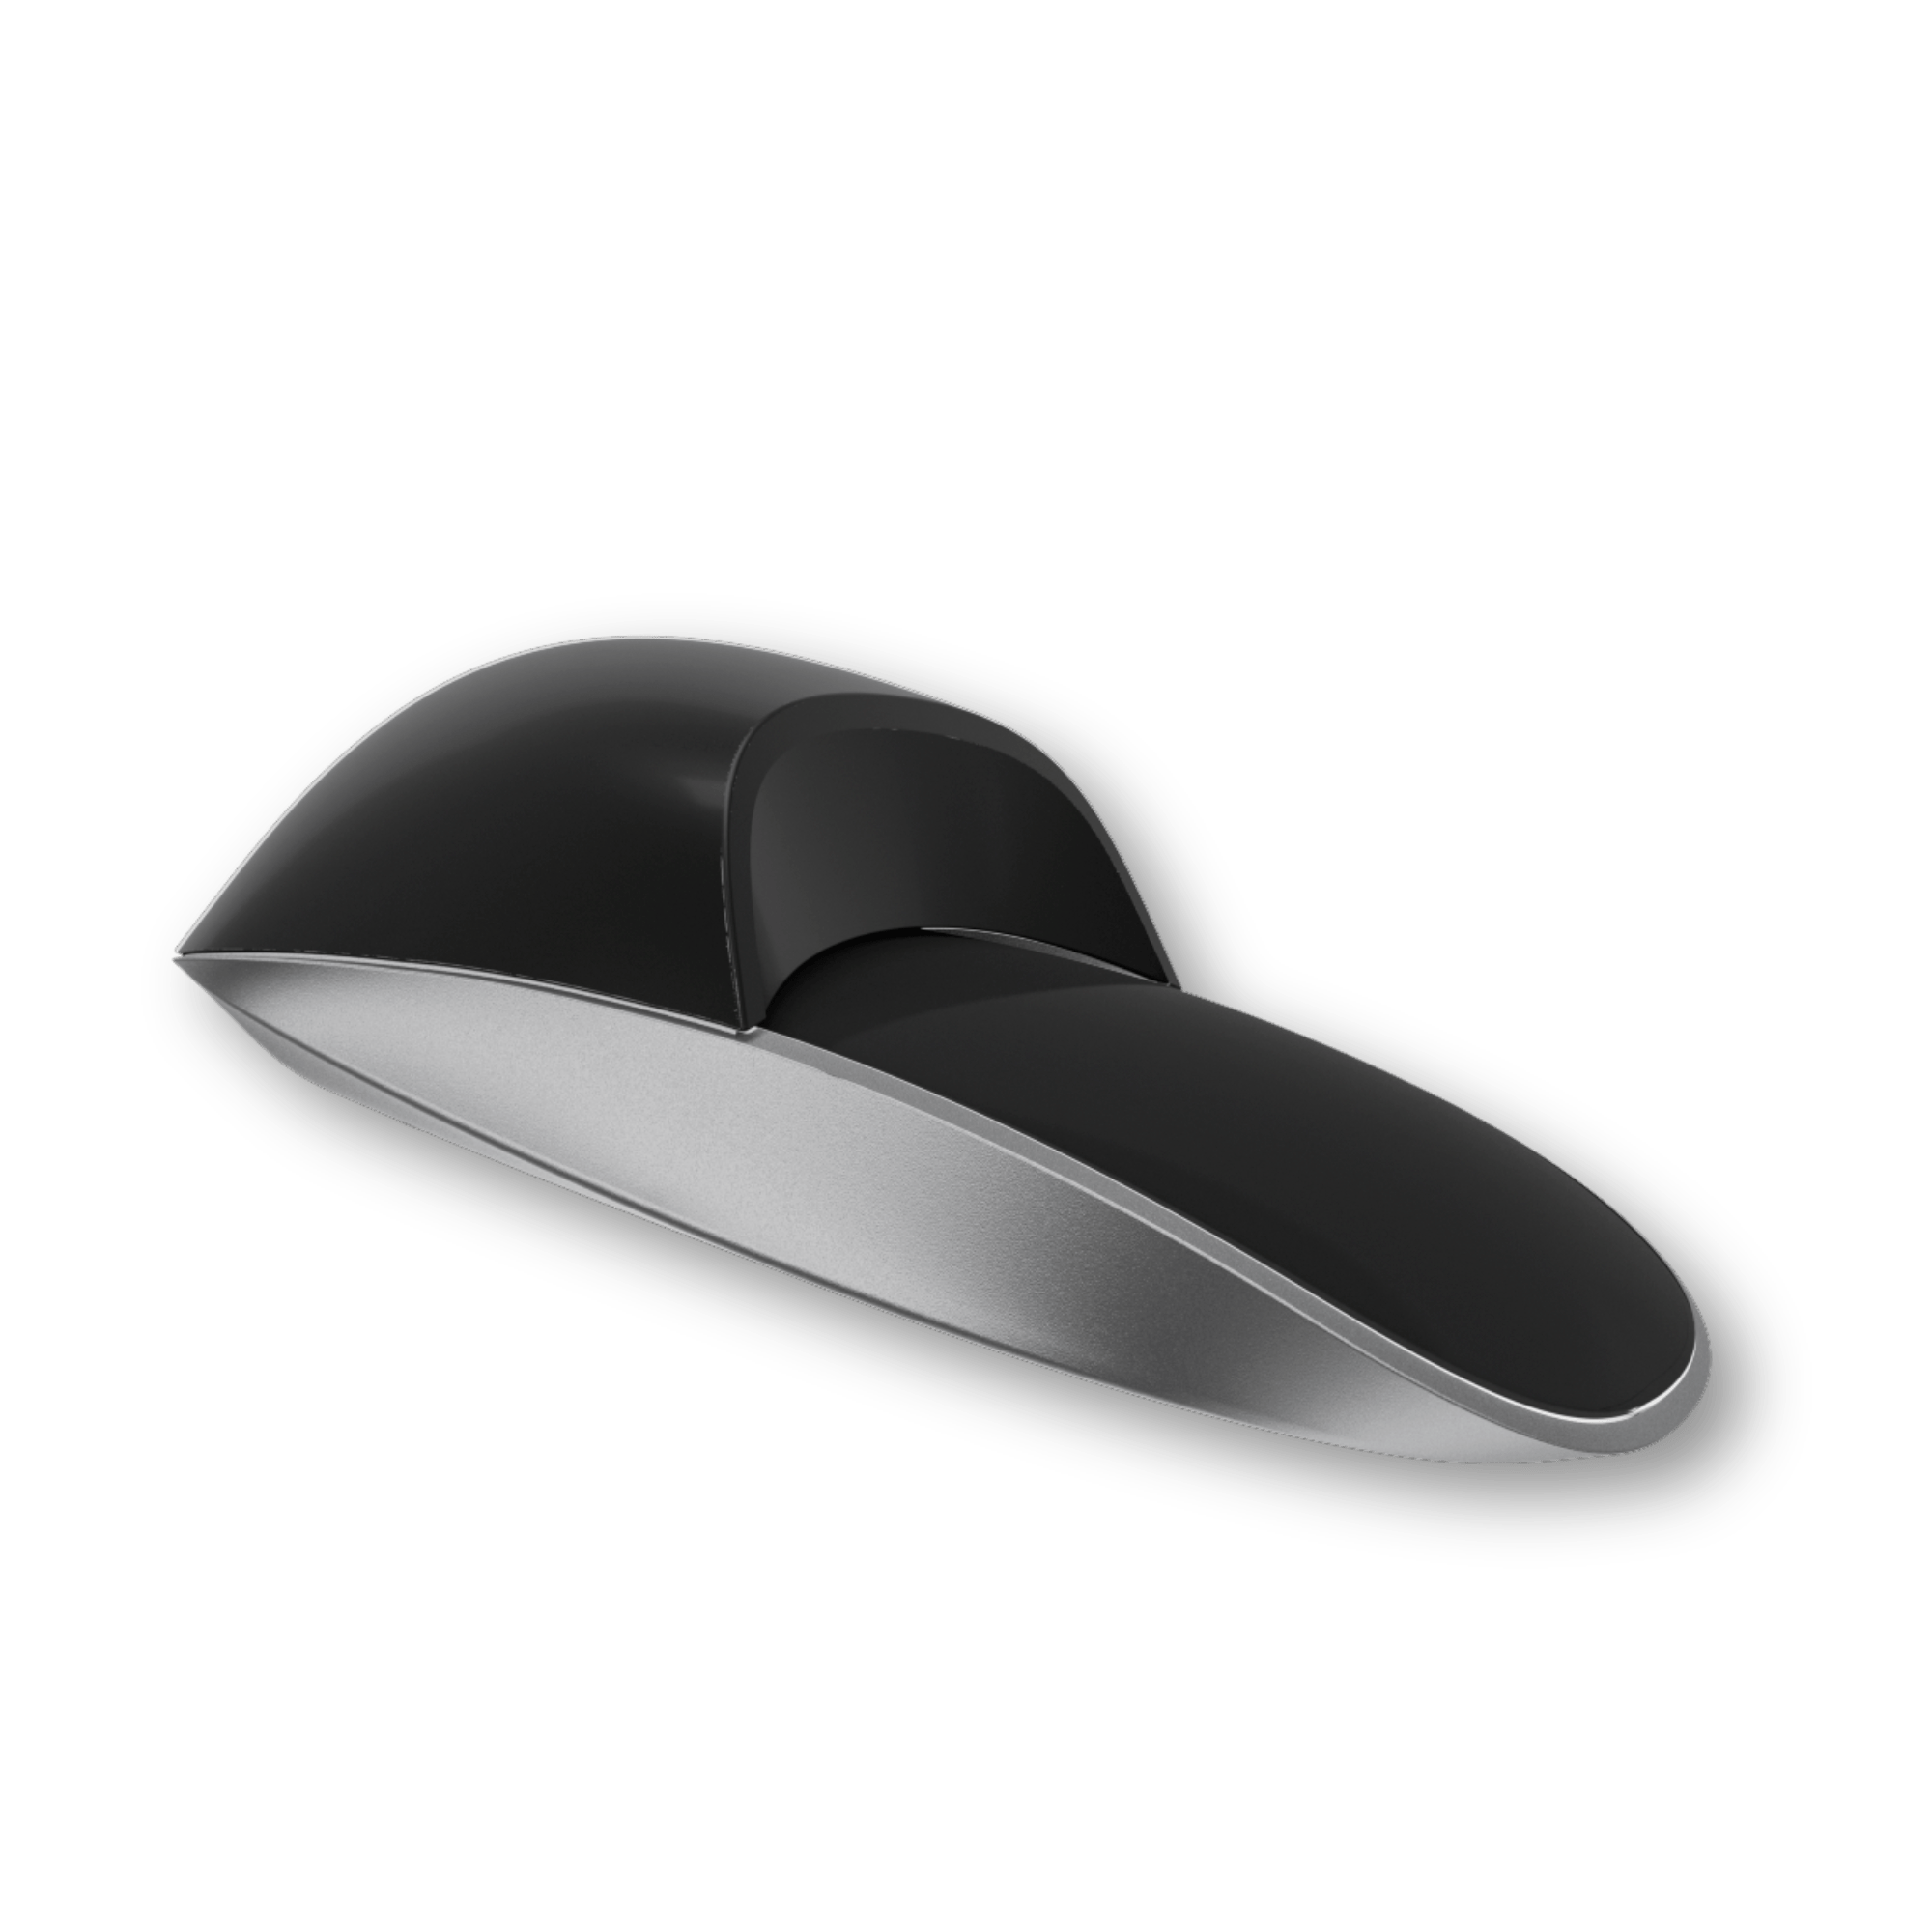 Solumics.Case - The ergonomic upgrade for your iMac Mouse